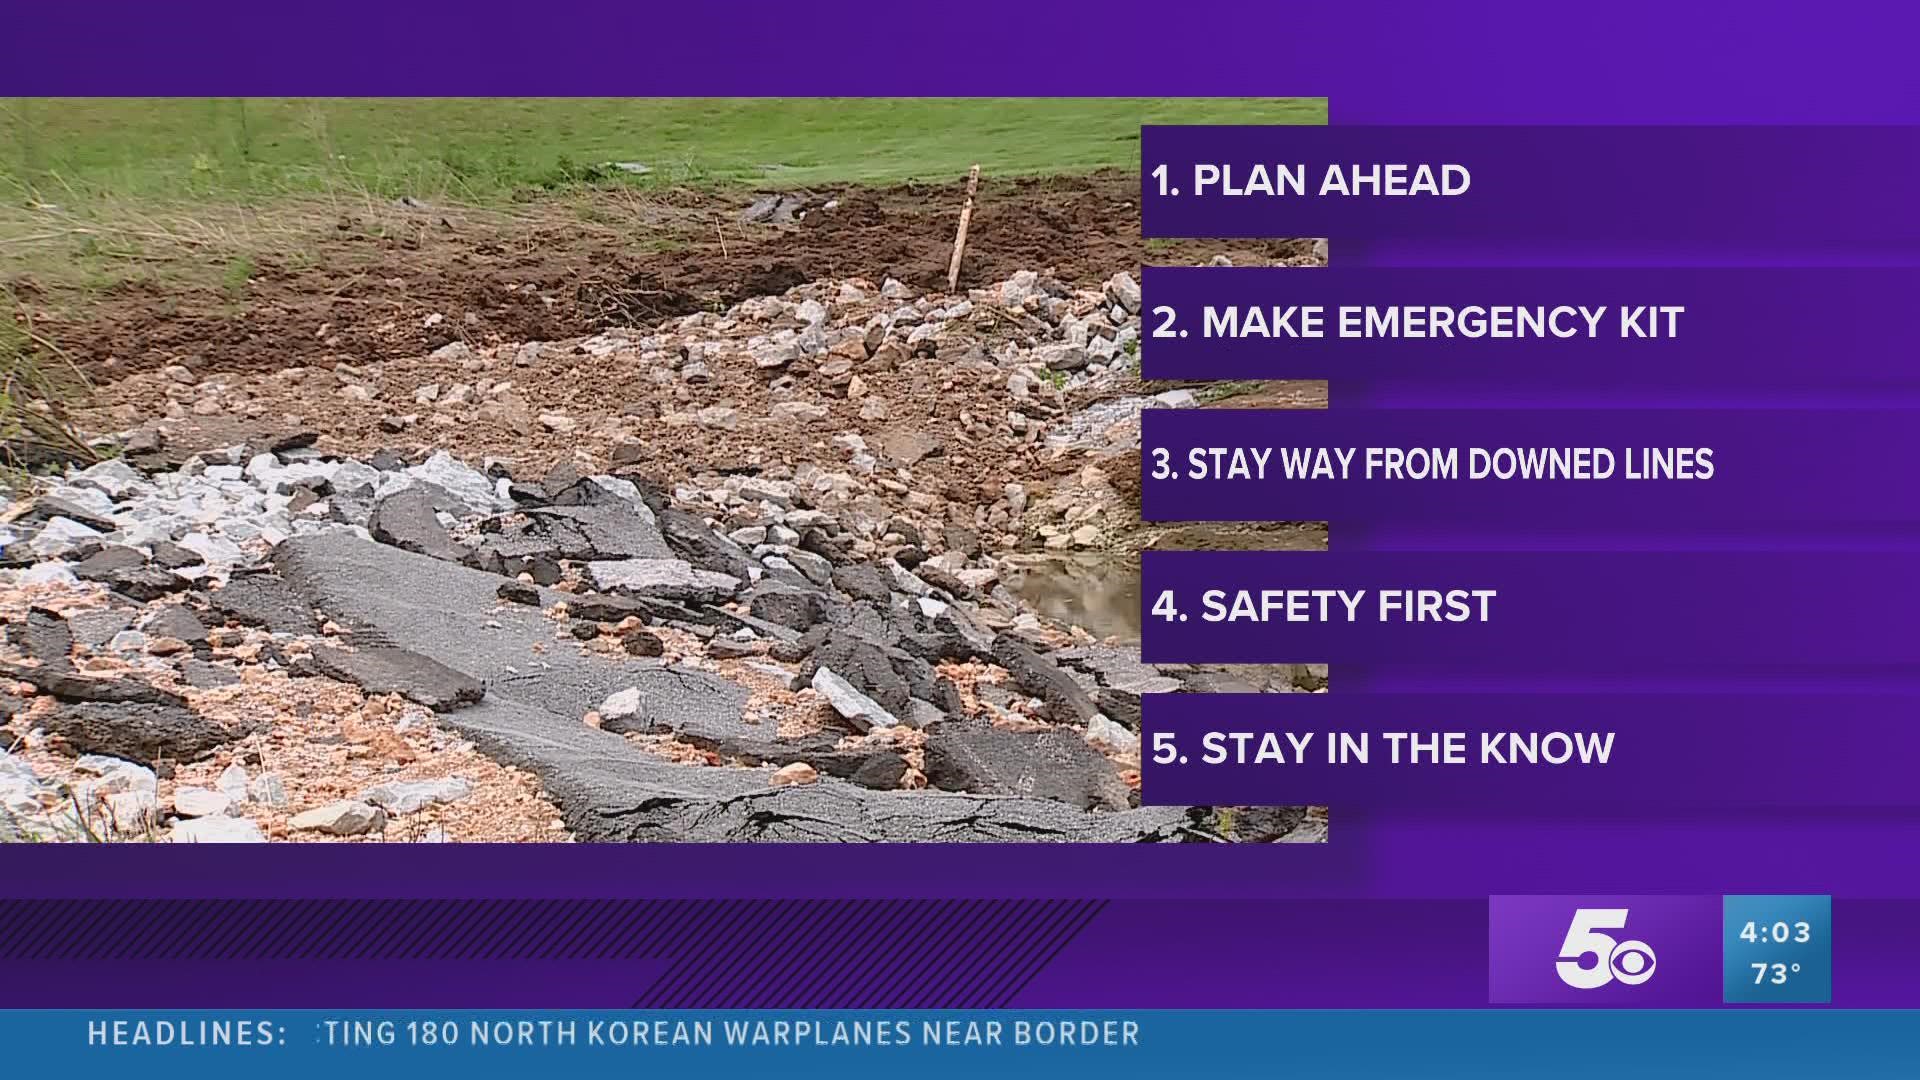 SWEPCO released five safety tips ahead of the storms.